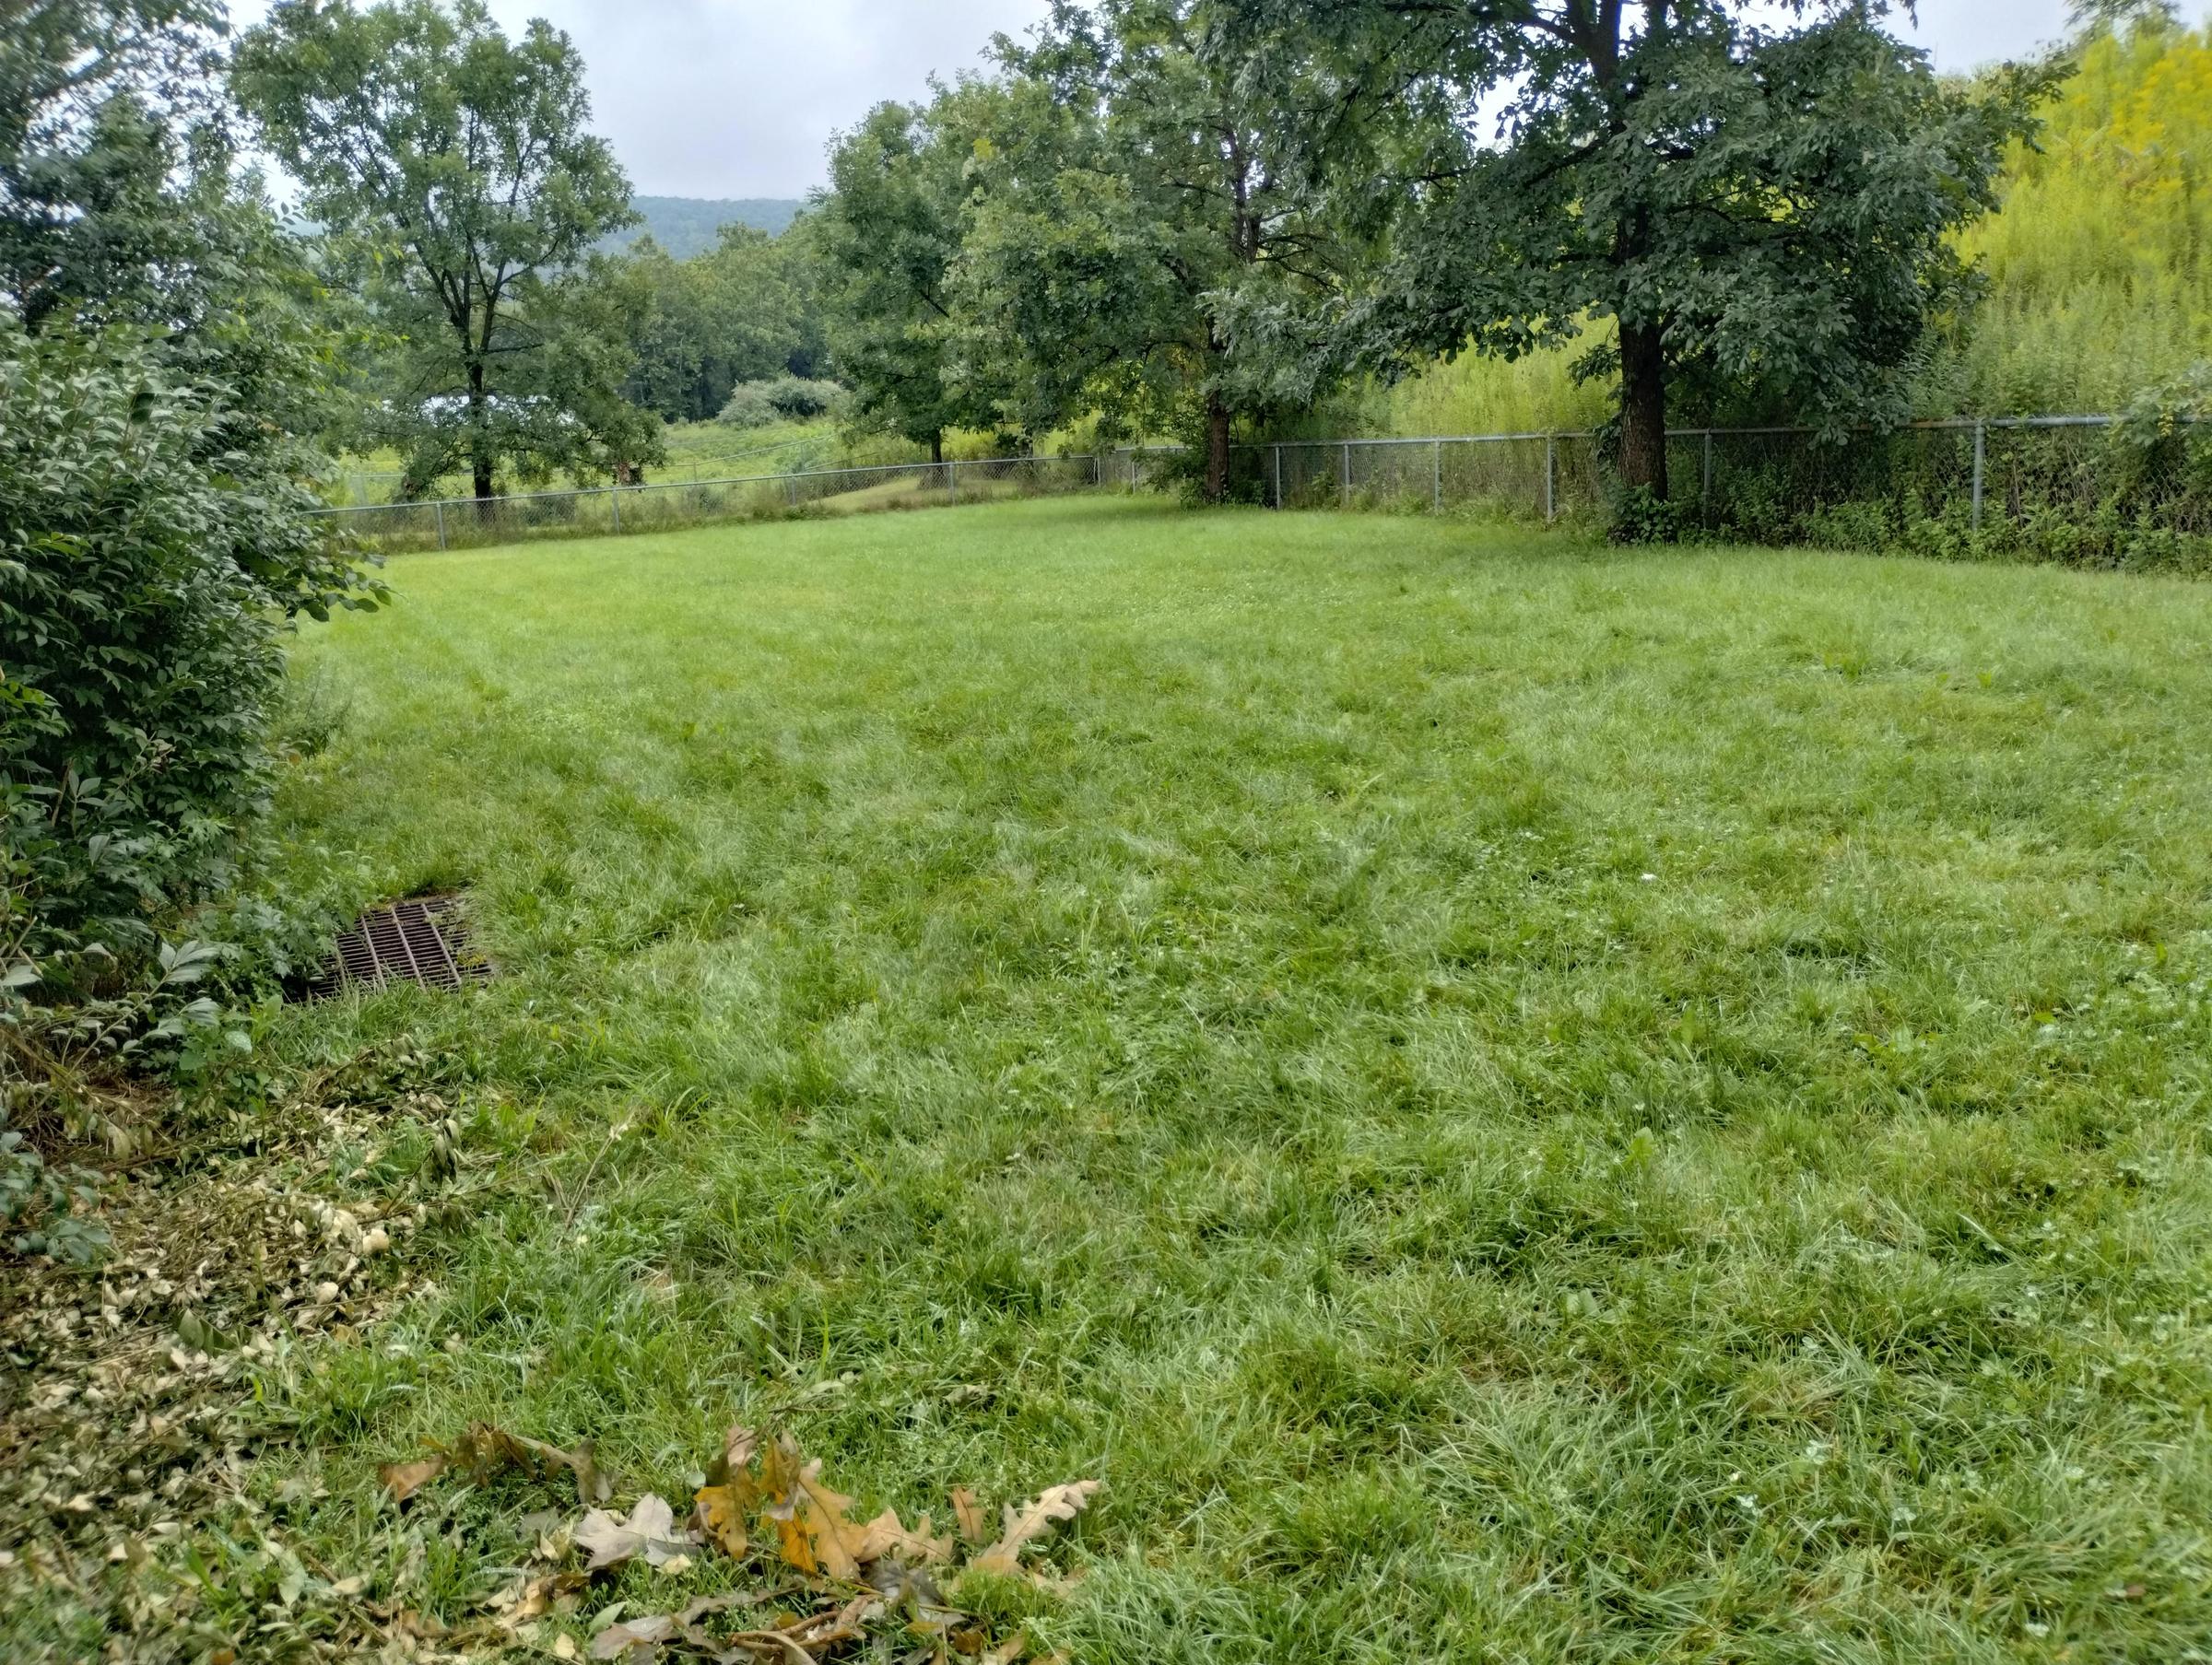 Pet Friendly Dog Park at Pennsylvania Welcome Center